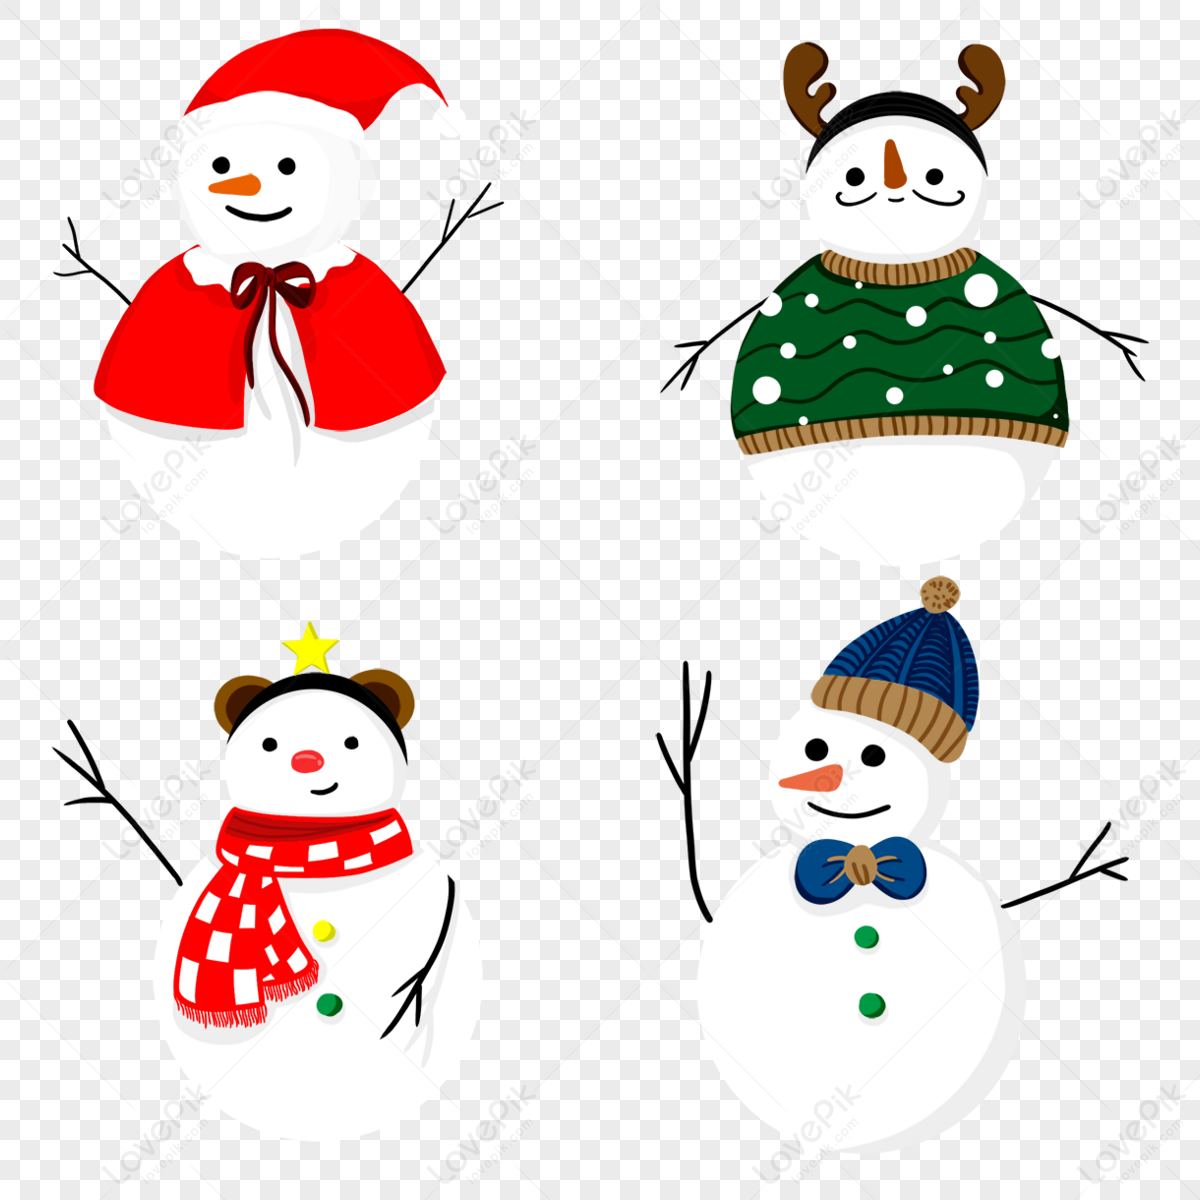 how to draw snowman with pencil / Christmas special drawing / pencil sketch  - YouTube